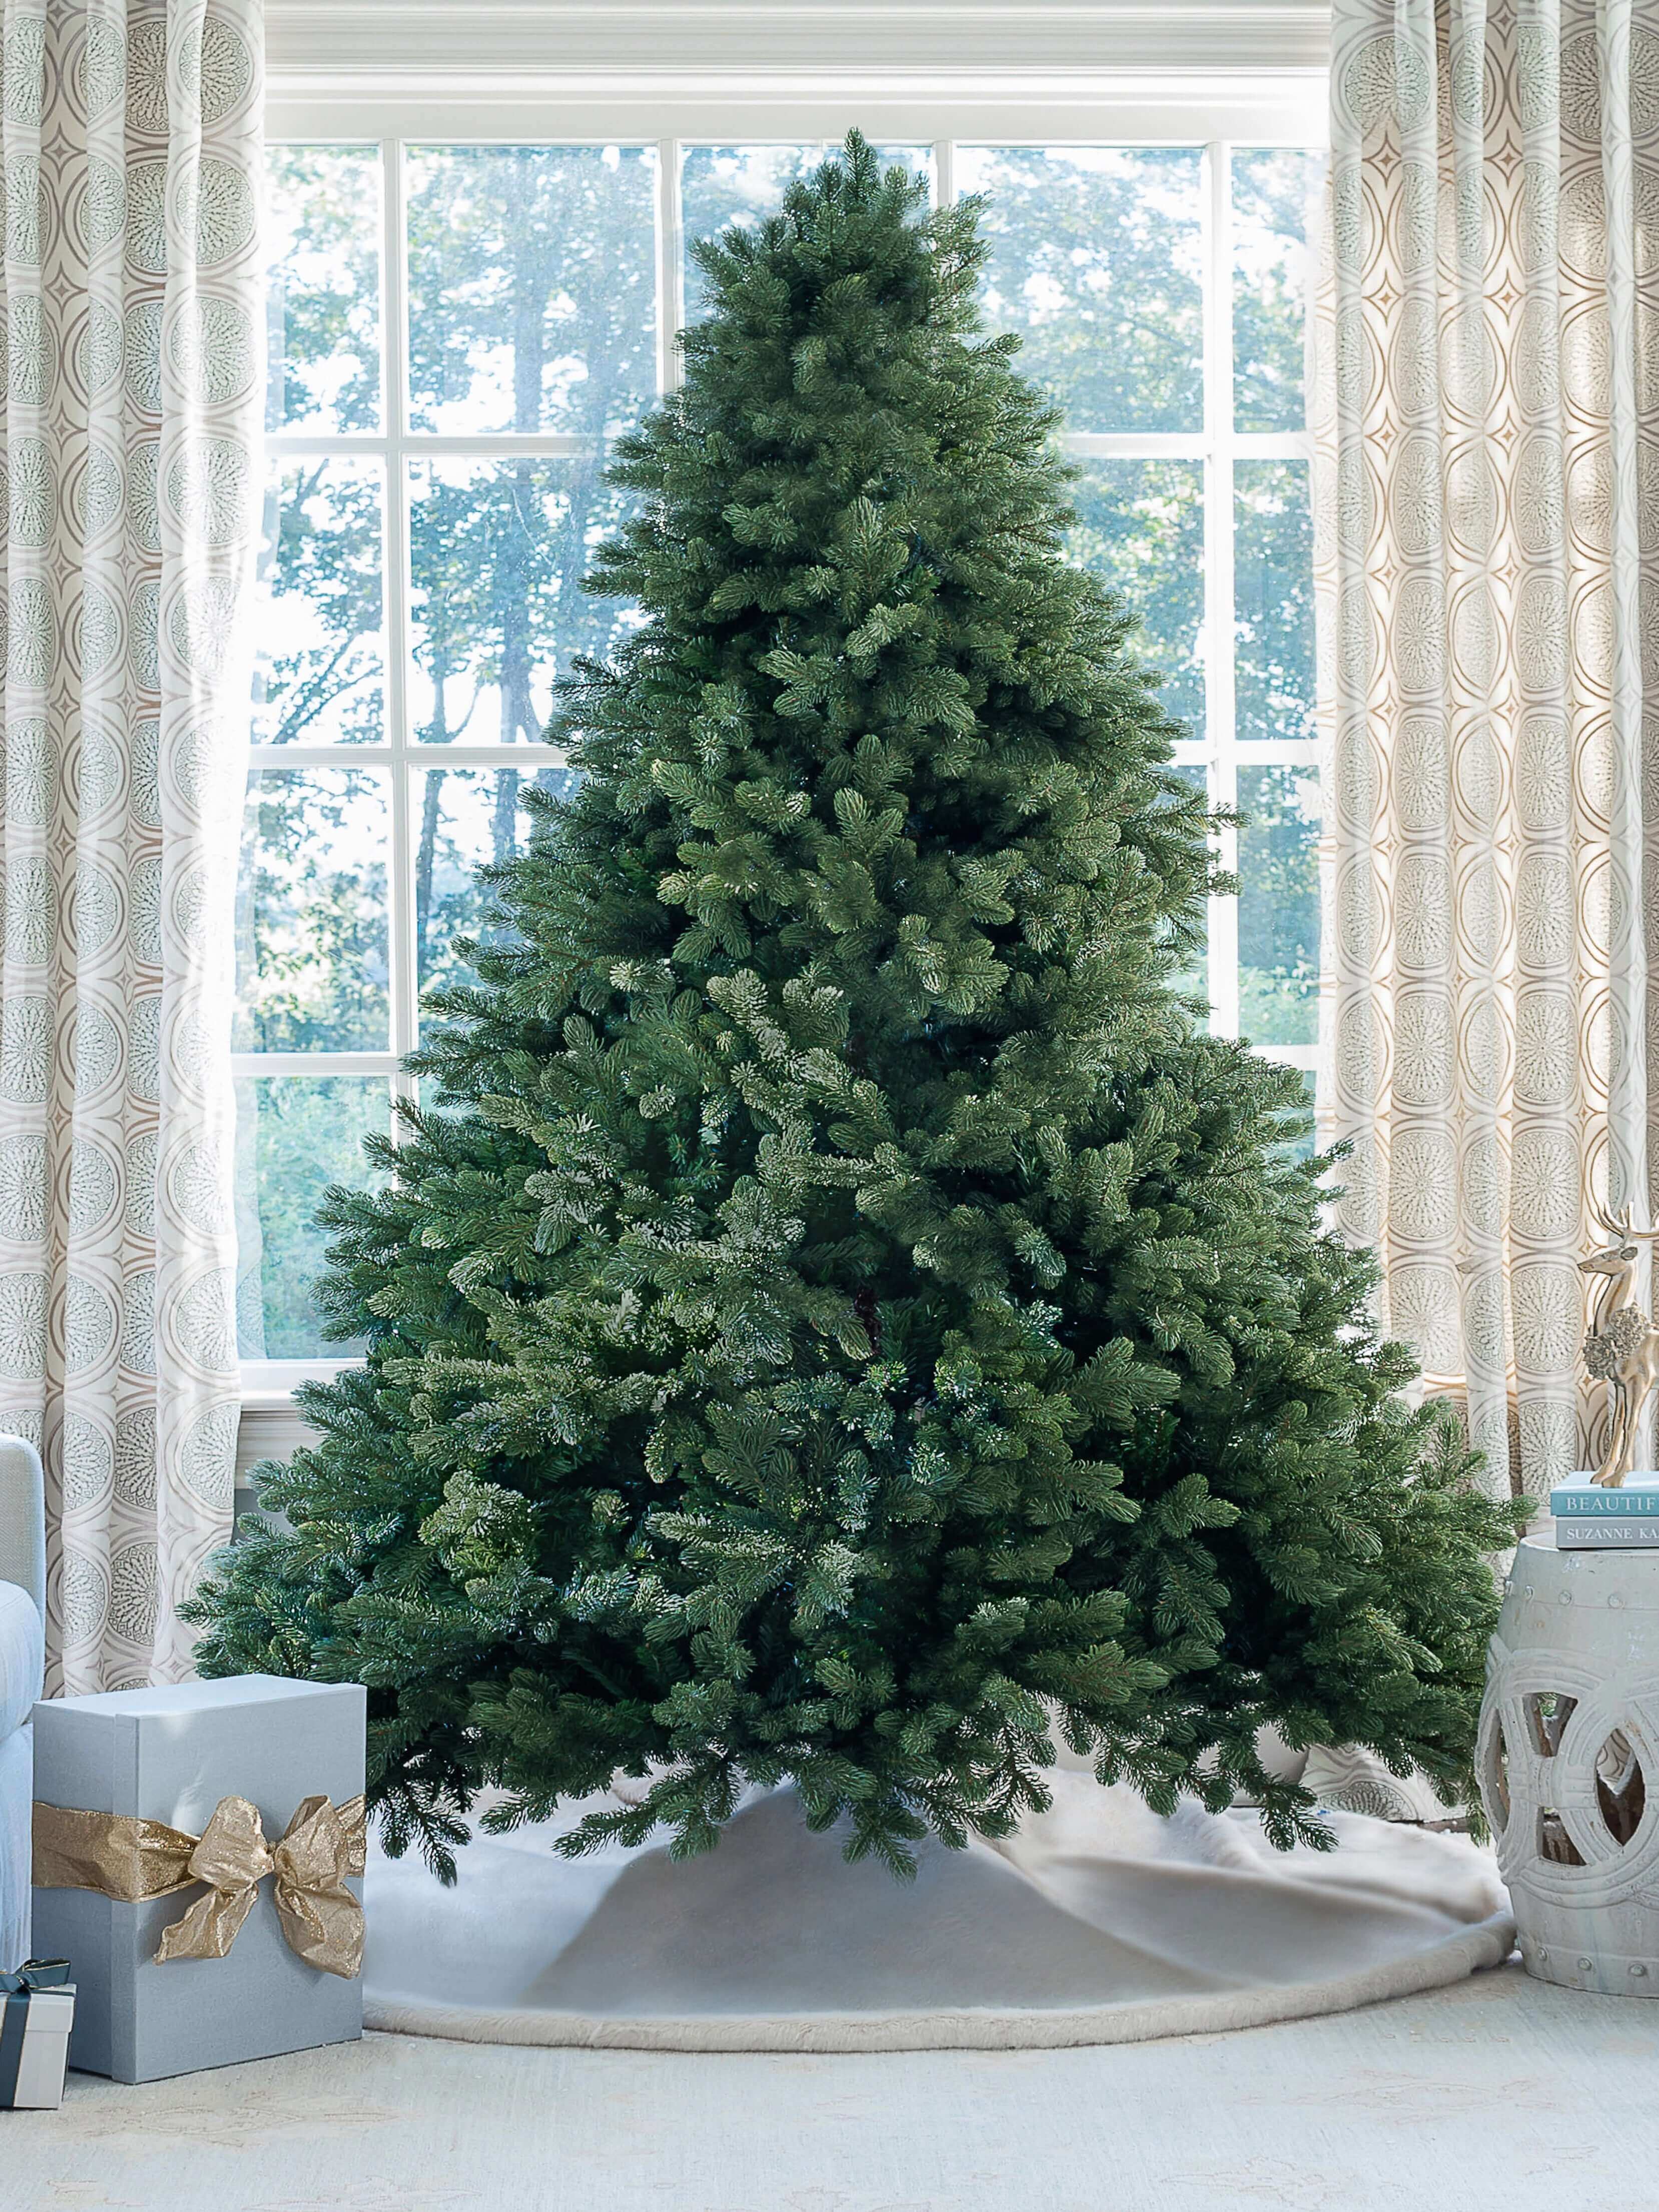 King of Christmas 8' Cypress Spruce Quick-Shape Artificial Christmas Tree with 1500 Warm White & Multi-Color LED Lights